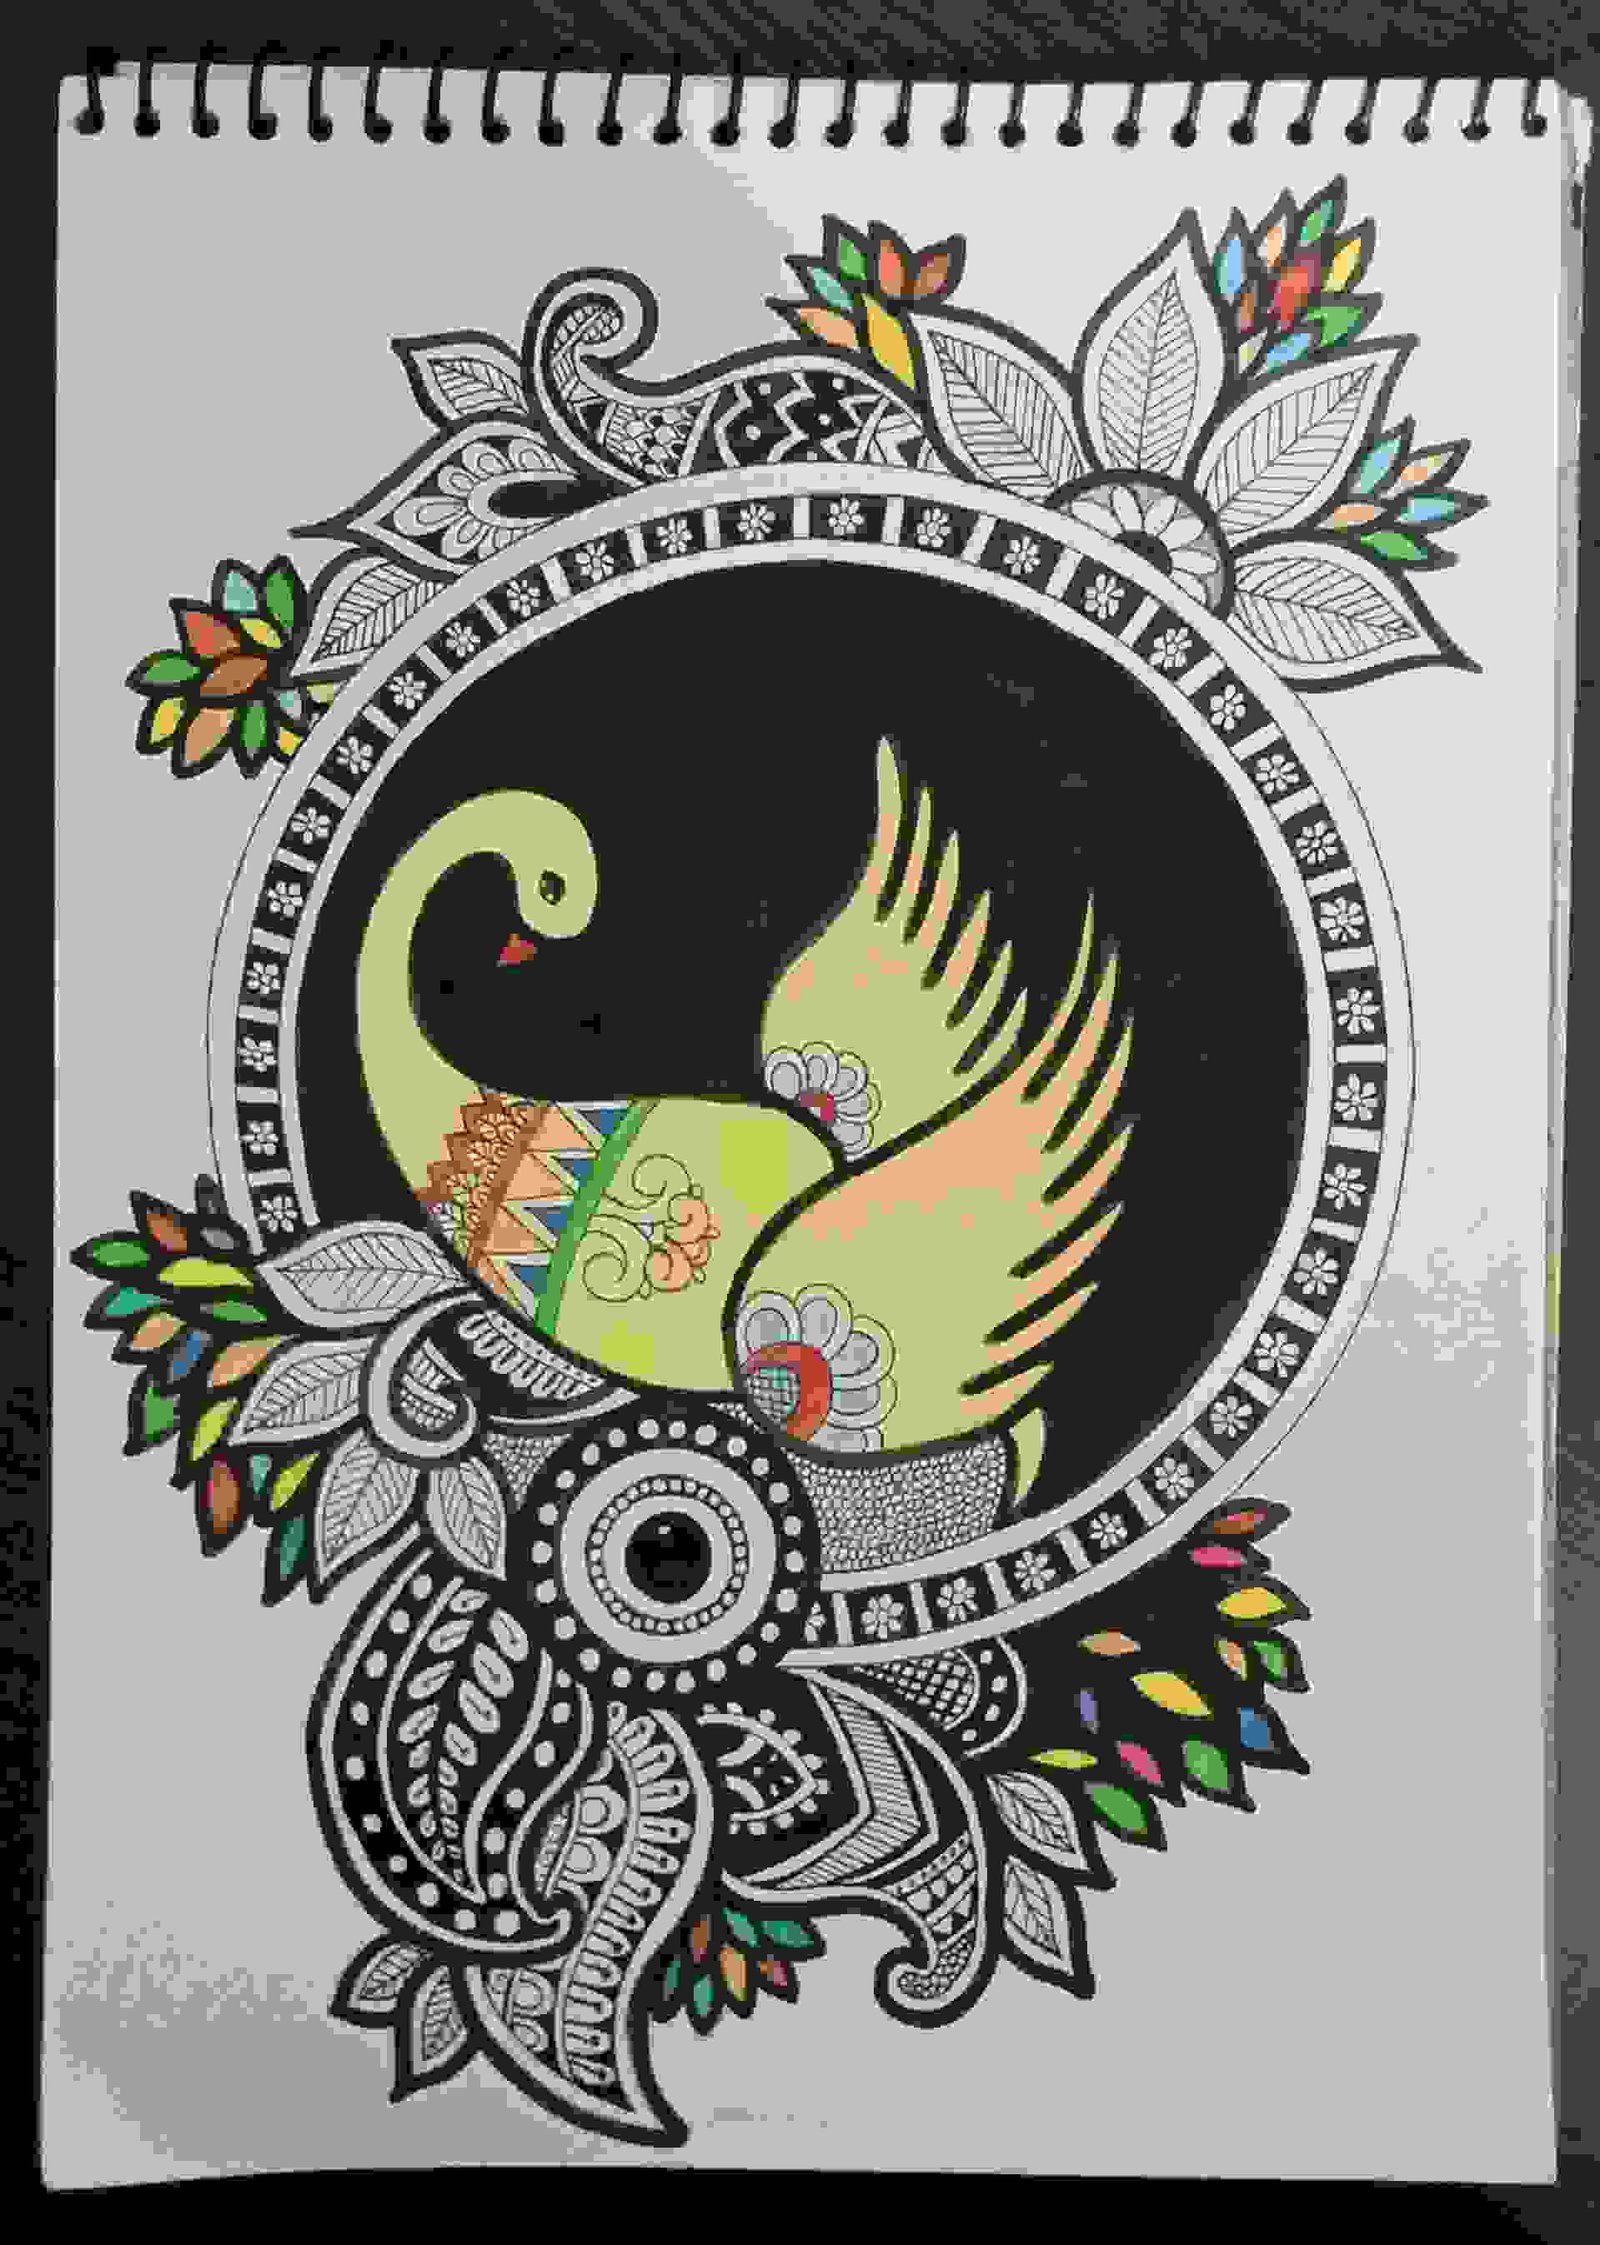 Painting Of Swan Mandala Art Size A4 Size Price 100 I Have M